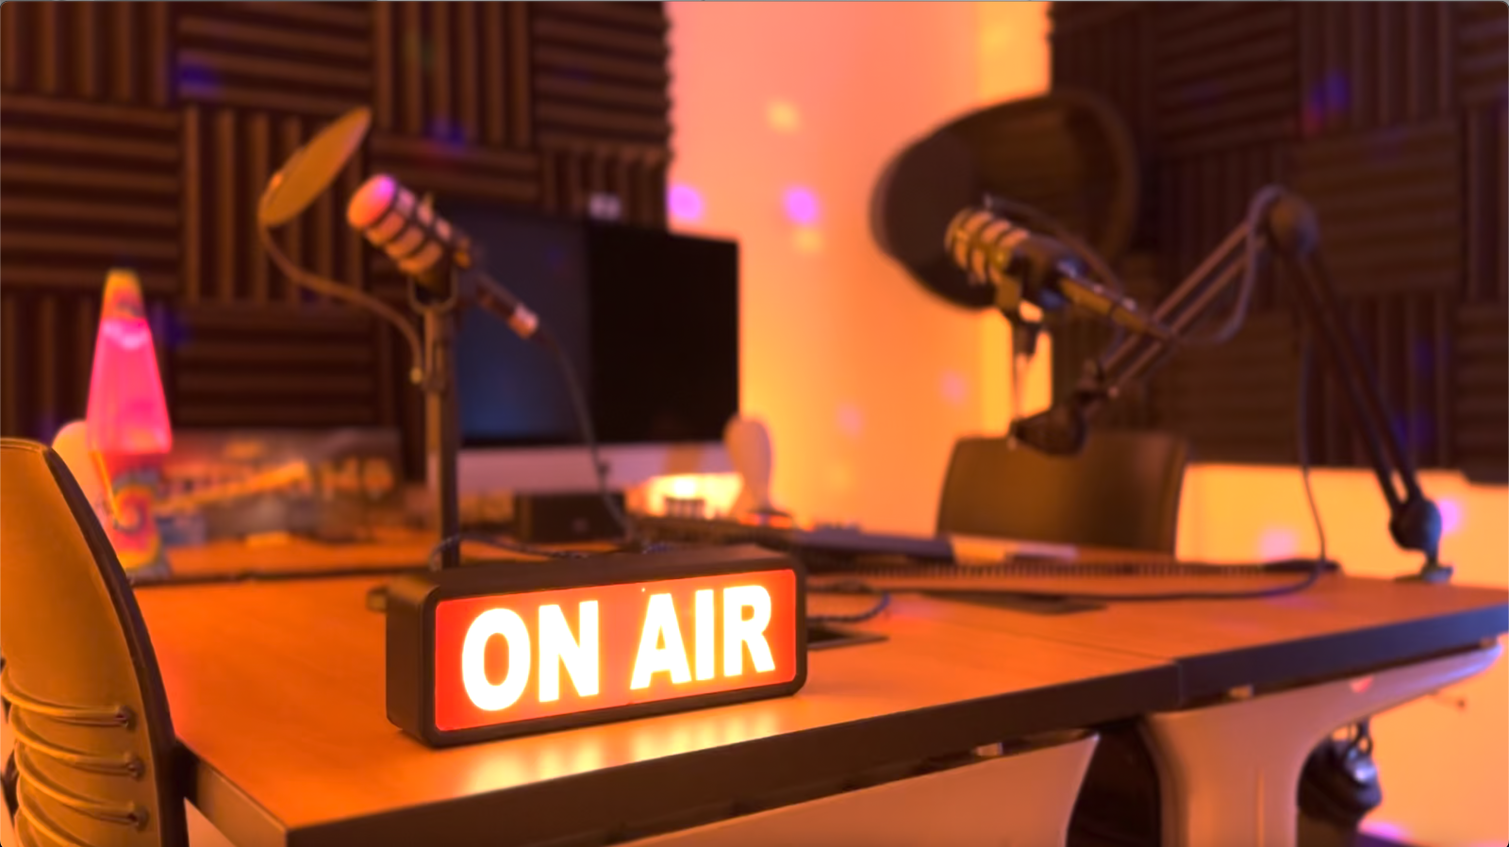 "On Air" Sign in Studio 148's audio corner, with audio equipment in the backgro…